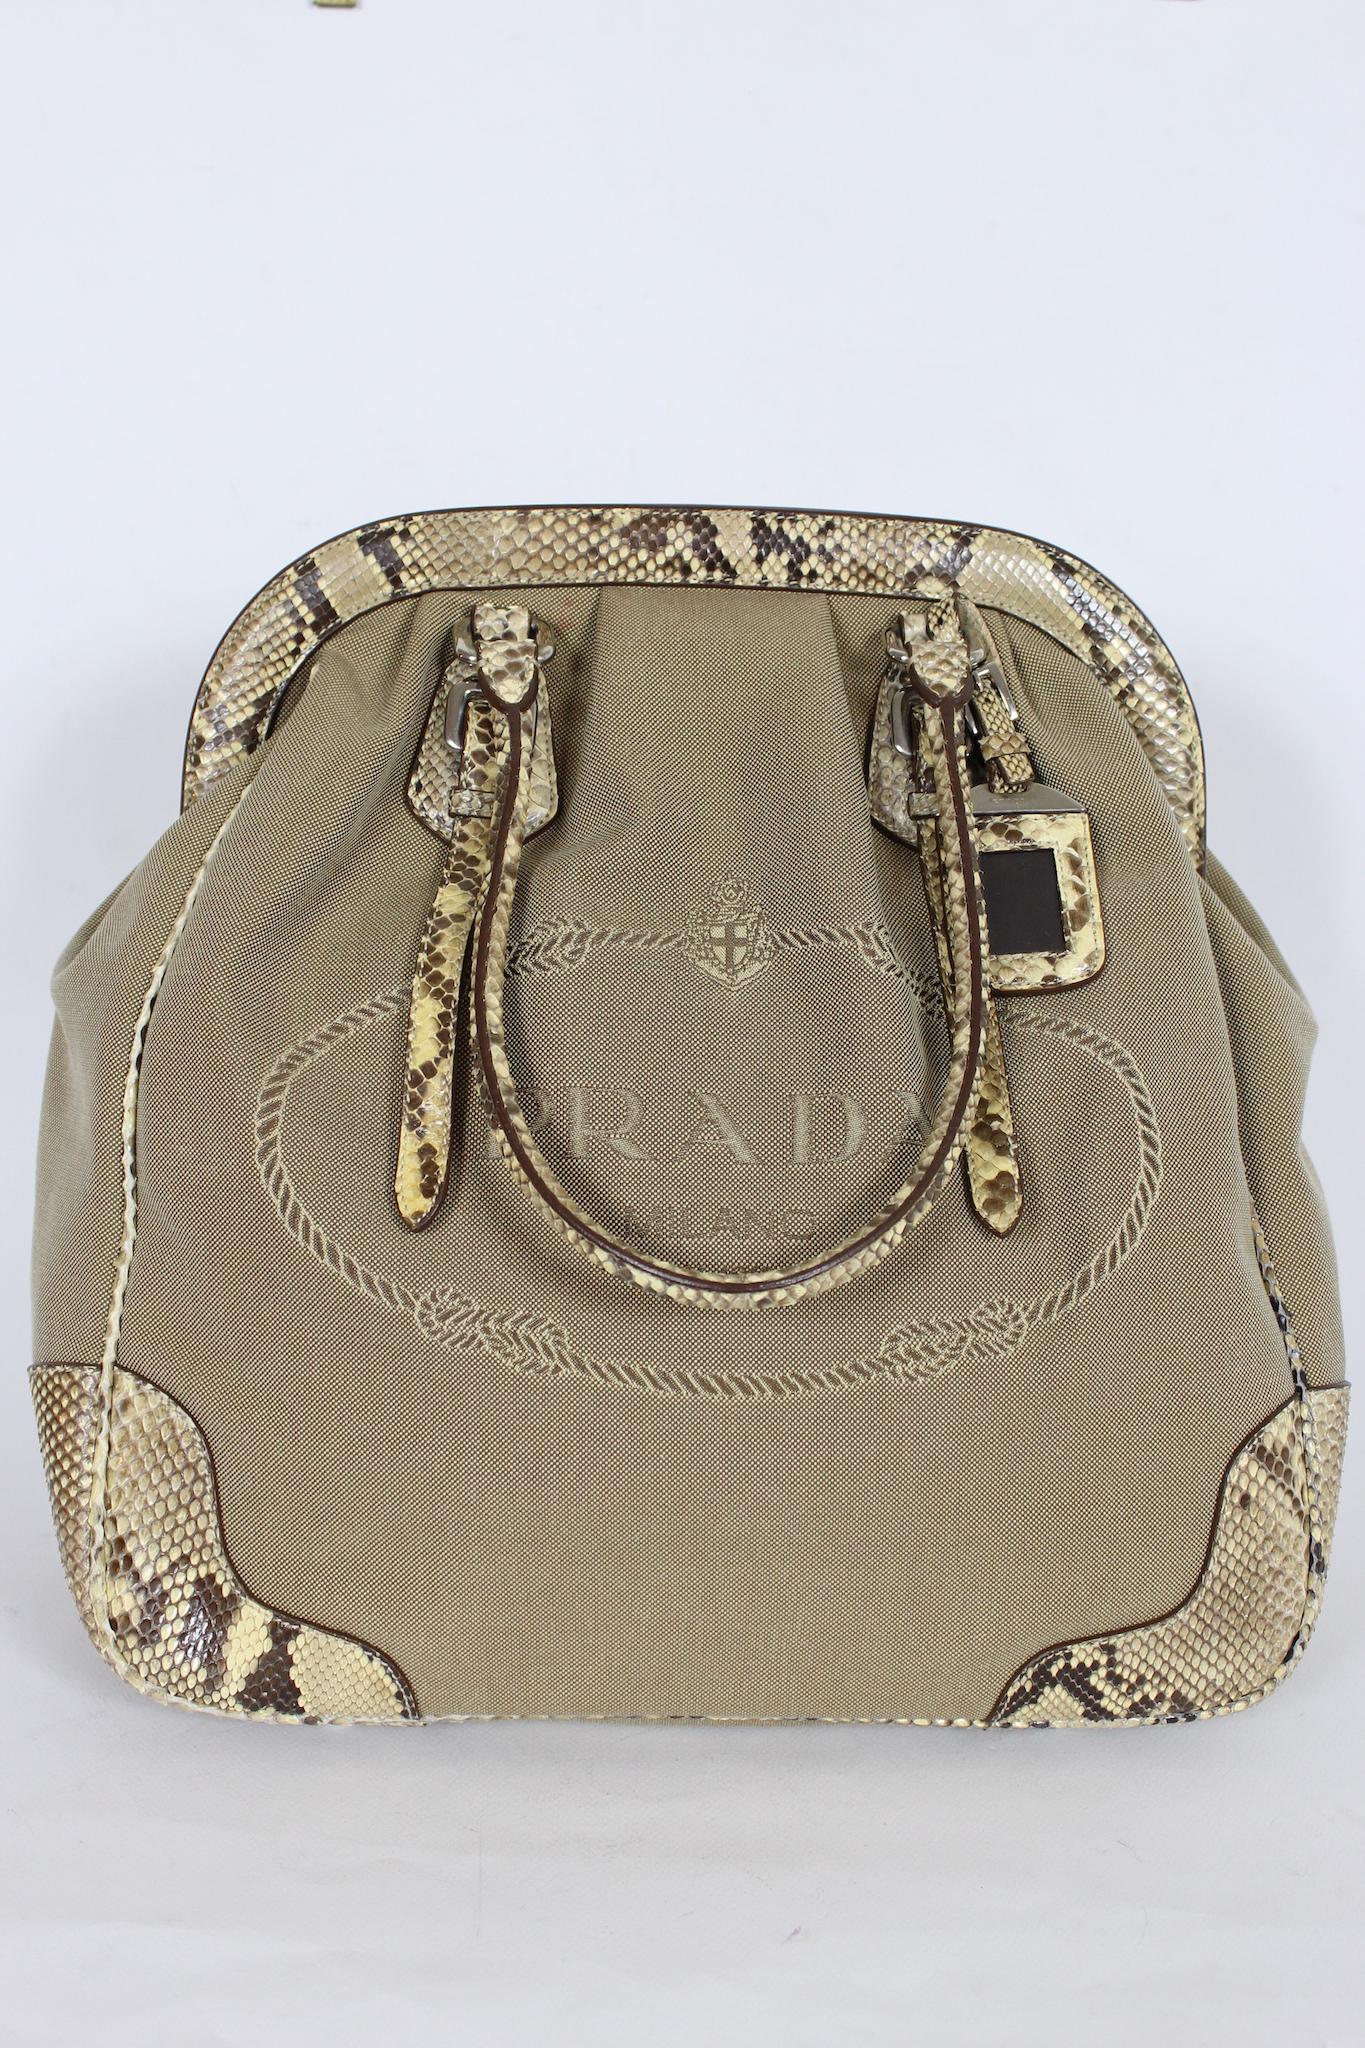 This chic and stylish Prada bag is the perfect accessory for any fashion-forward individual. The tote bag is expertly crafted from a combination of premium beige canvas and luxurious leather, giving it a unique and sophisticated look. The bag